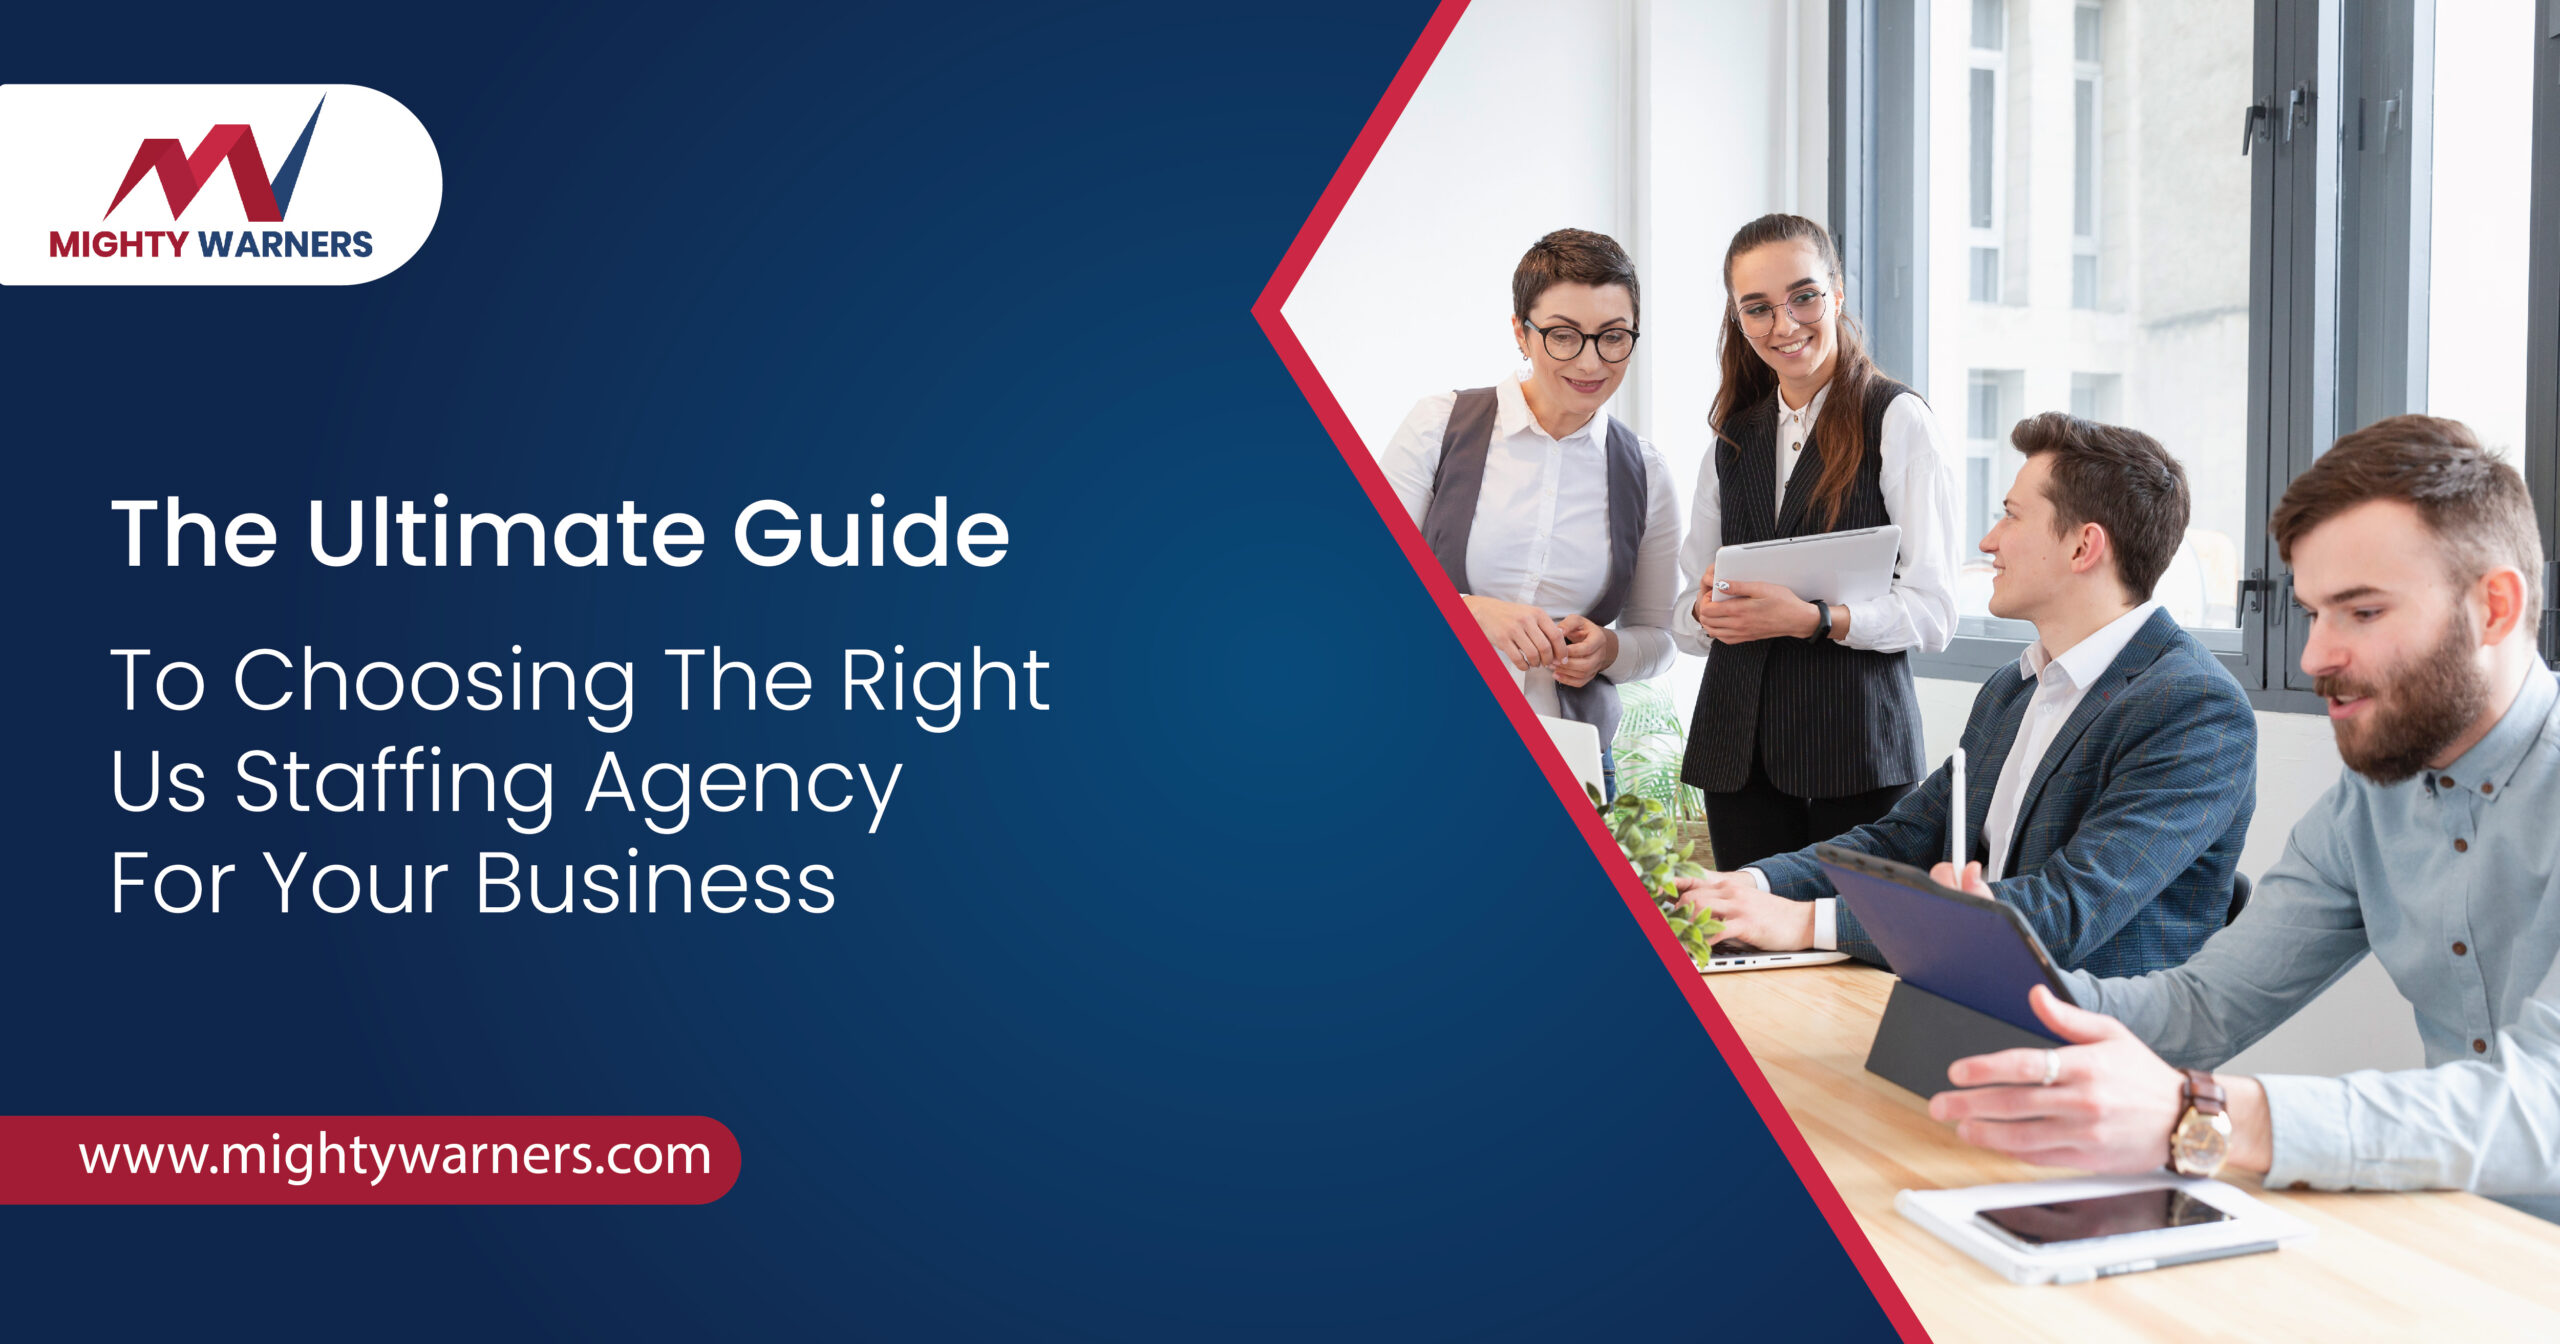 The Ultimate Guide to Choosing the Right US Staffing Agency for Your Business